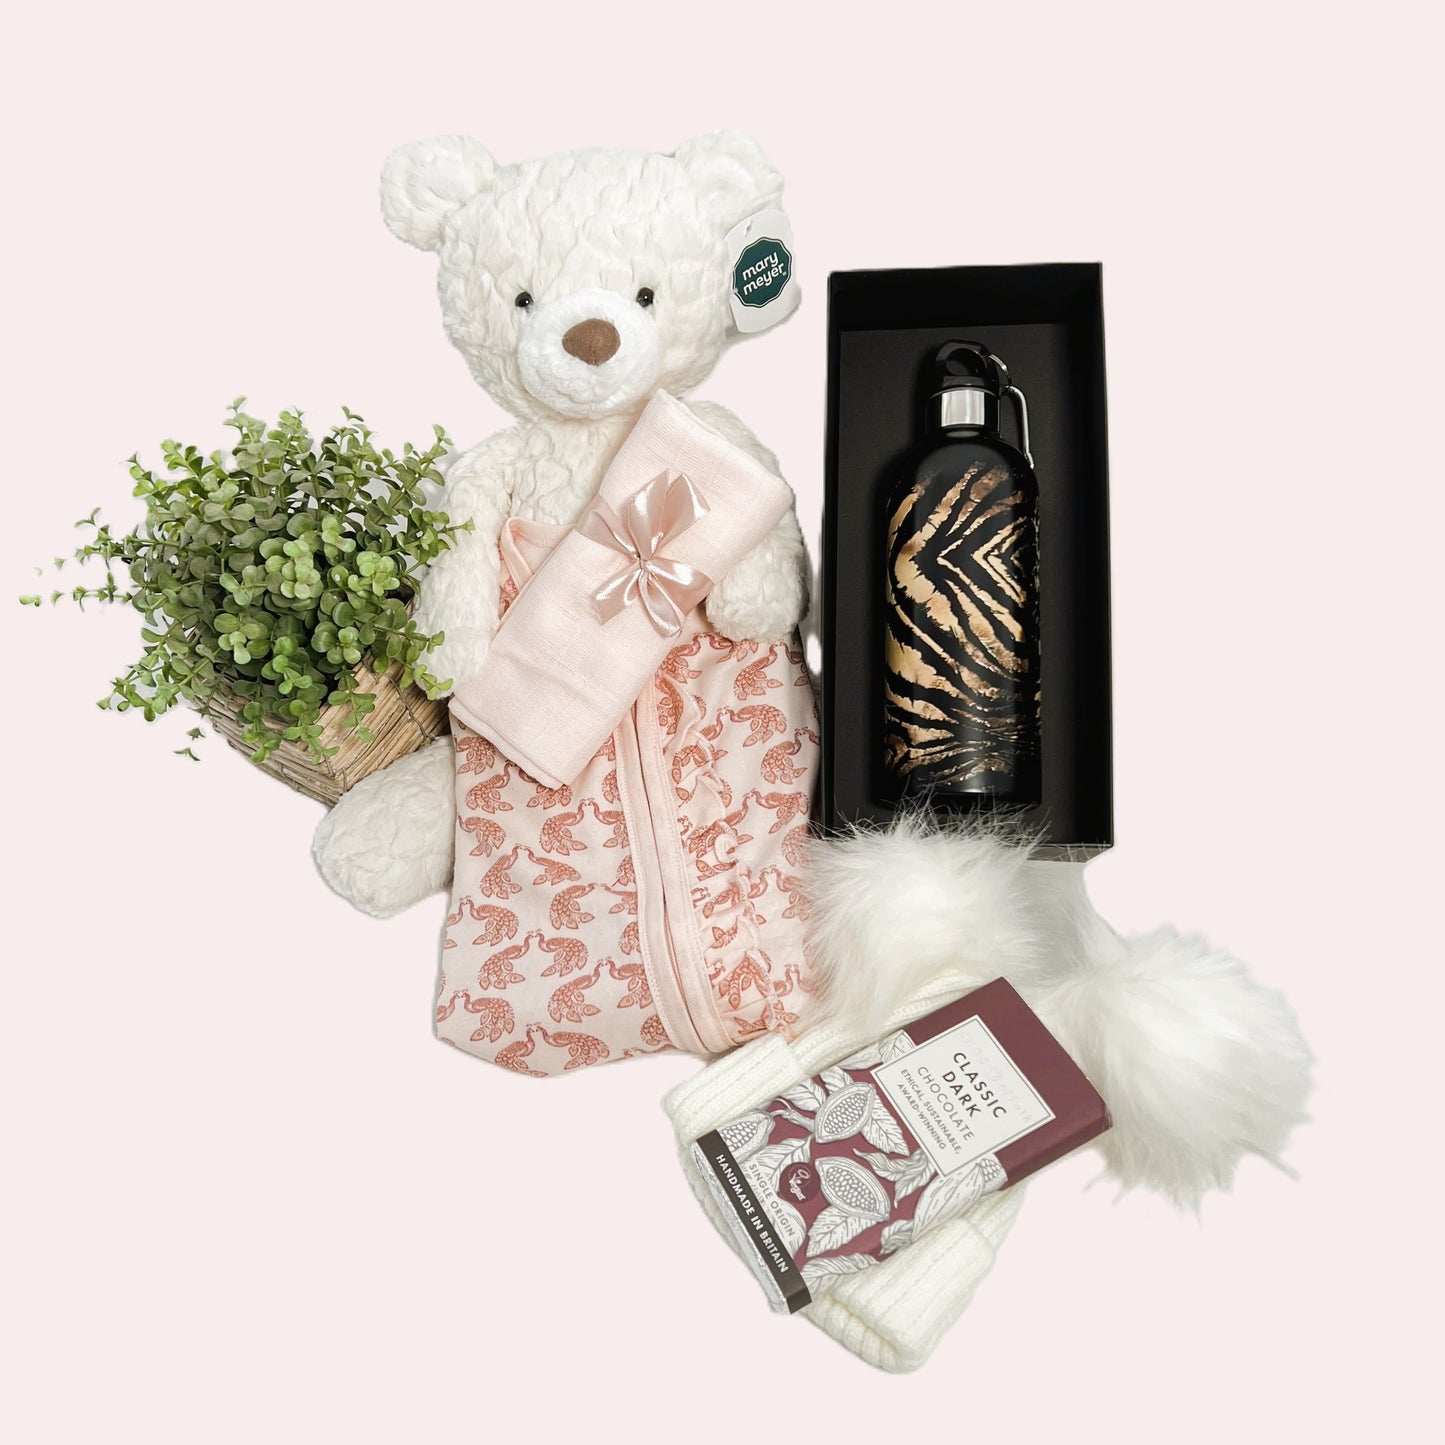 New Parents gift, this baby girl hamper comes in a grey baby keepsake box containing a Roberto Cavelli wtaer bottle, an organic zipped baby sleepsuit, a Mary Meyer cream Teddy bear, a handcrafted baby journal, a baby pompom hat and a bar of Choc Affair chocolate.